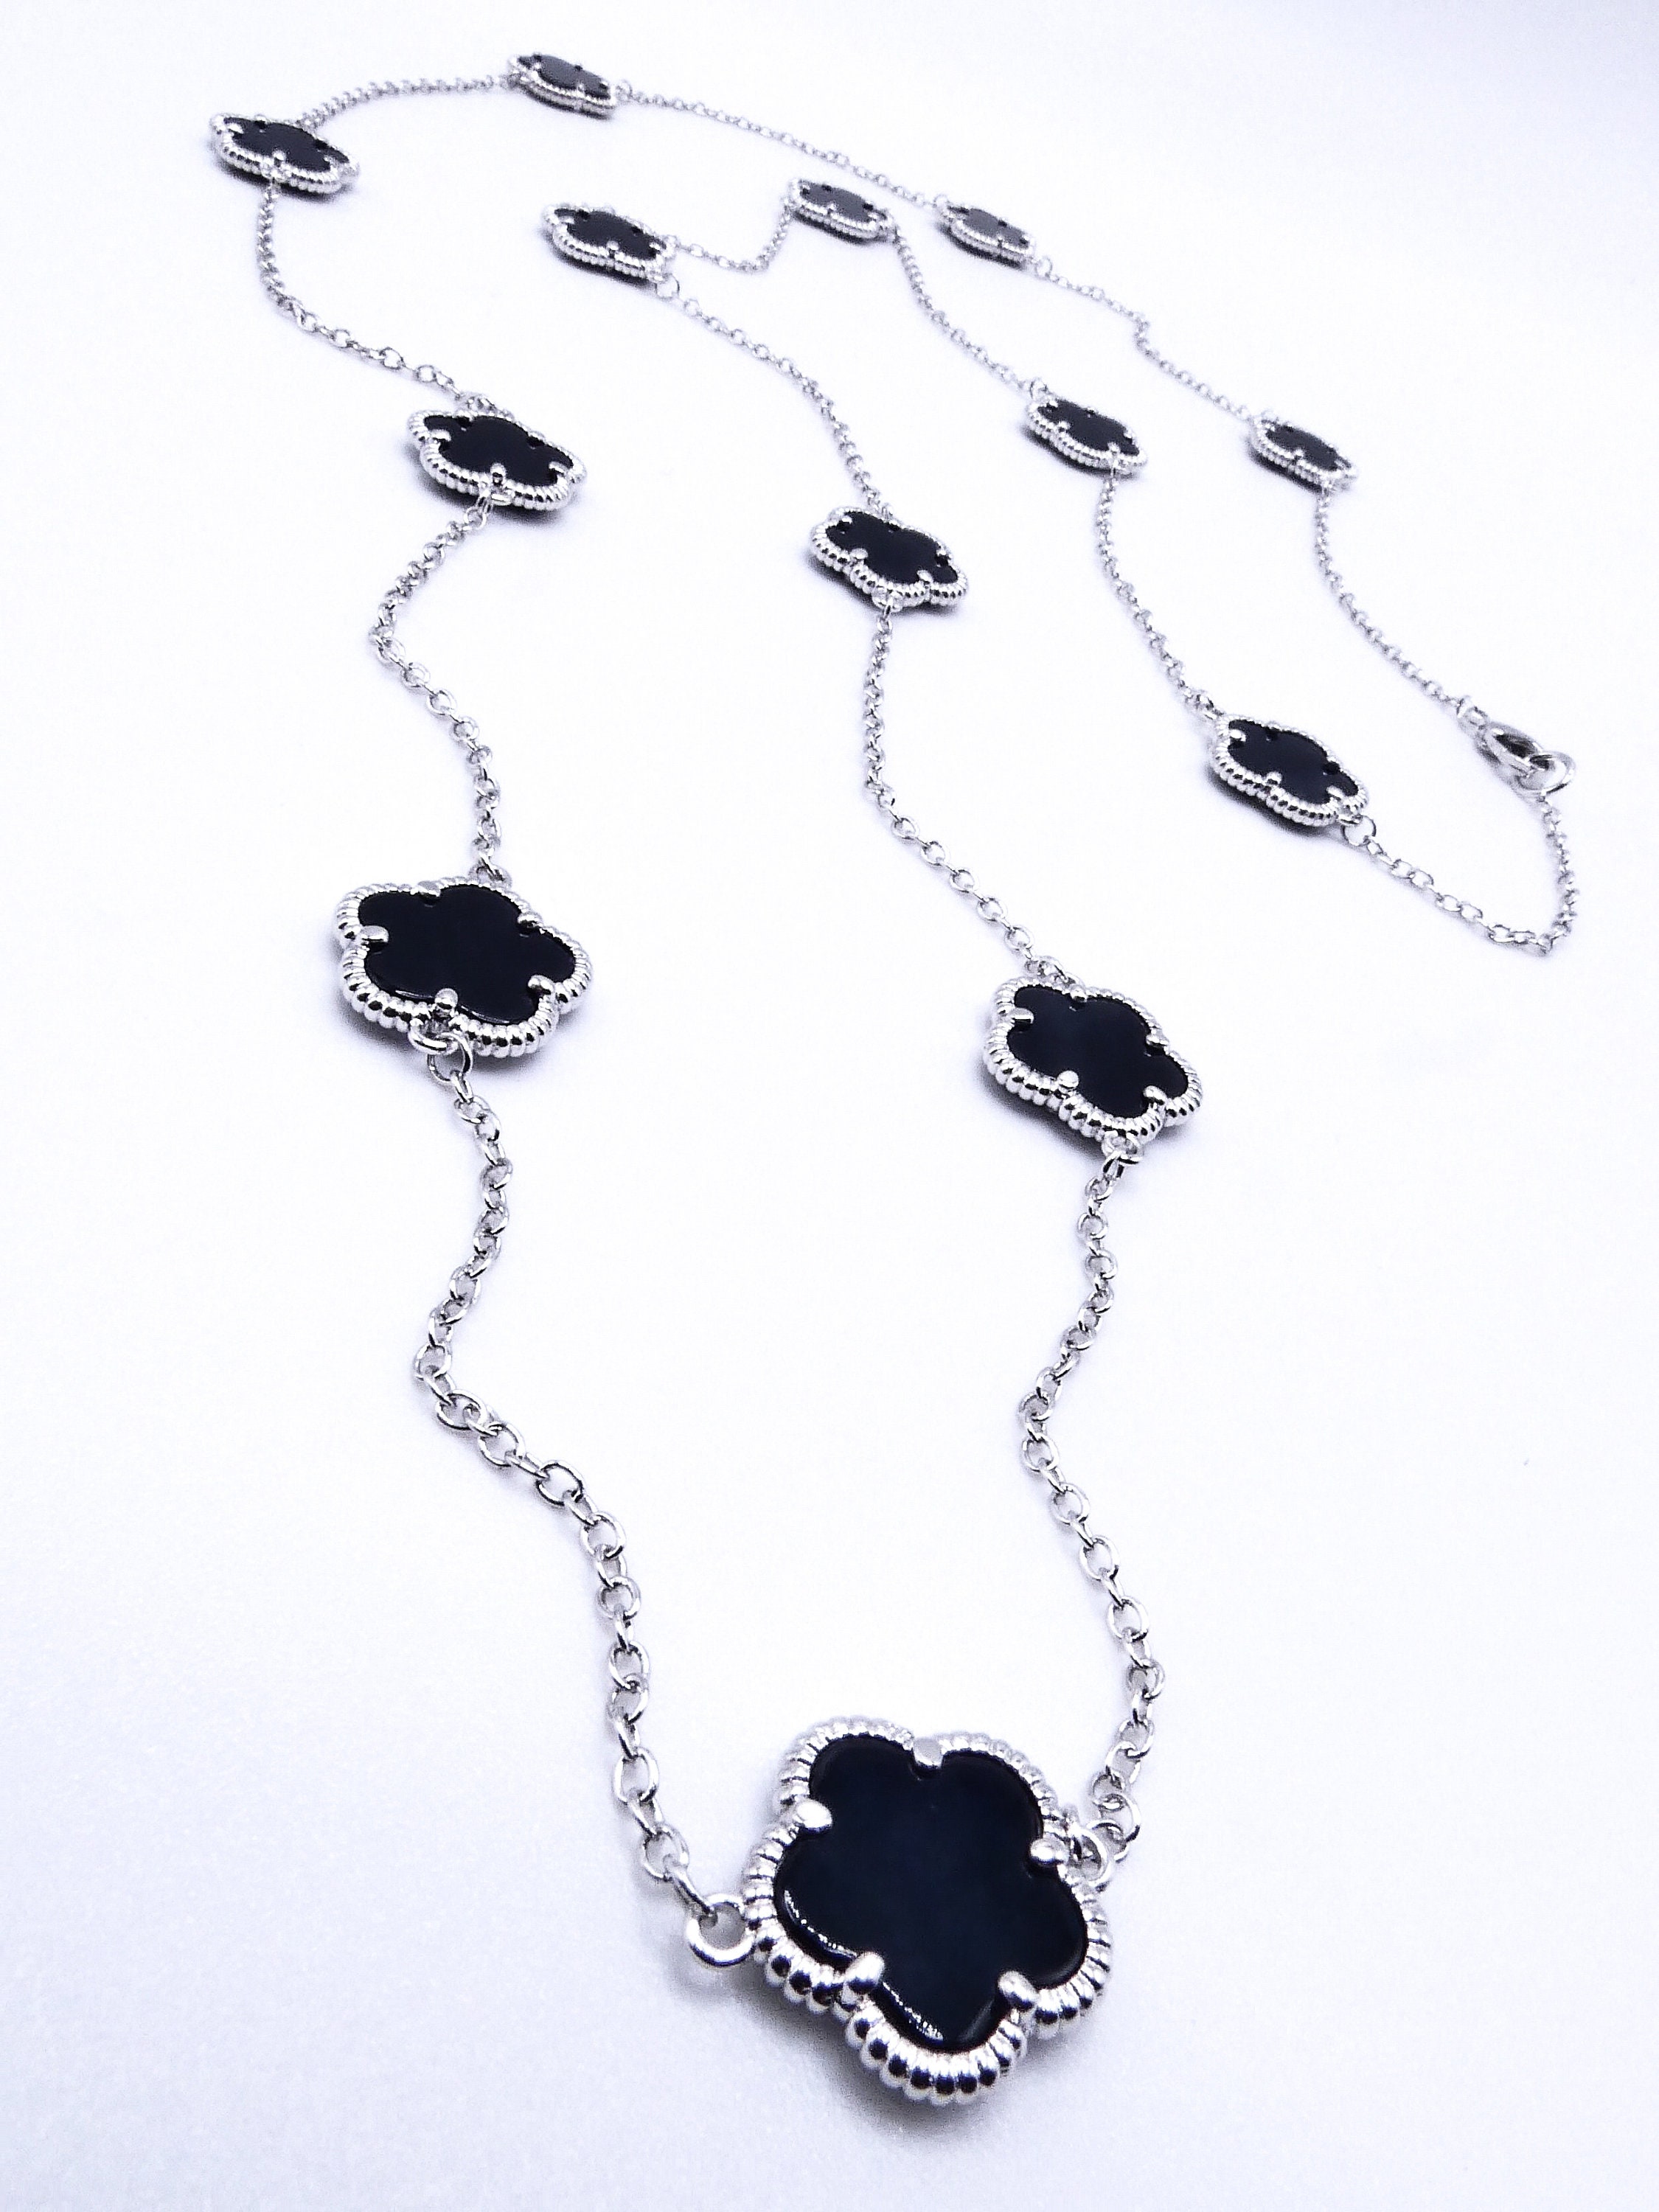 Sterling Silver Black Onyx Clover Necklace with CZ Border – HK Jewels